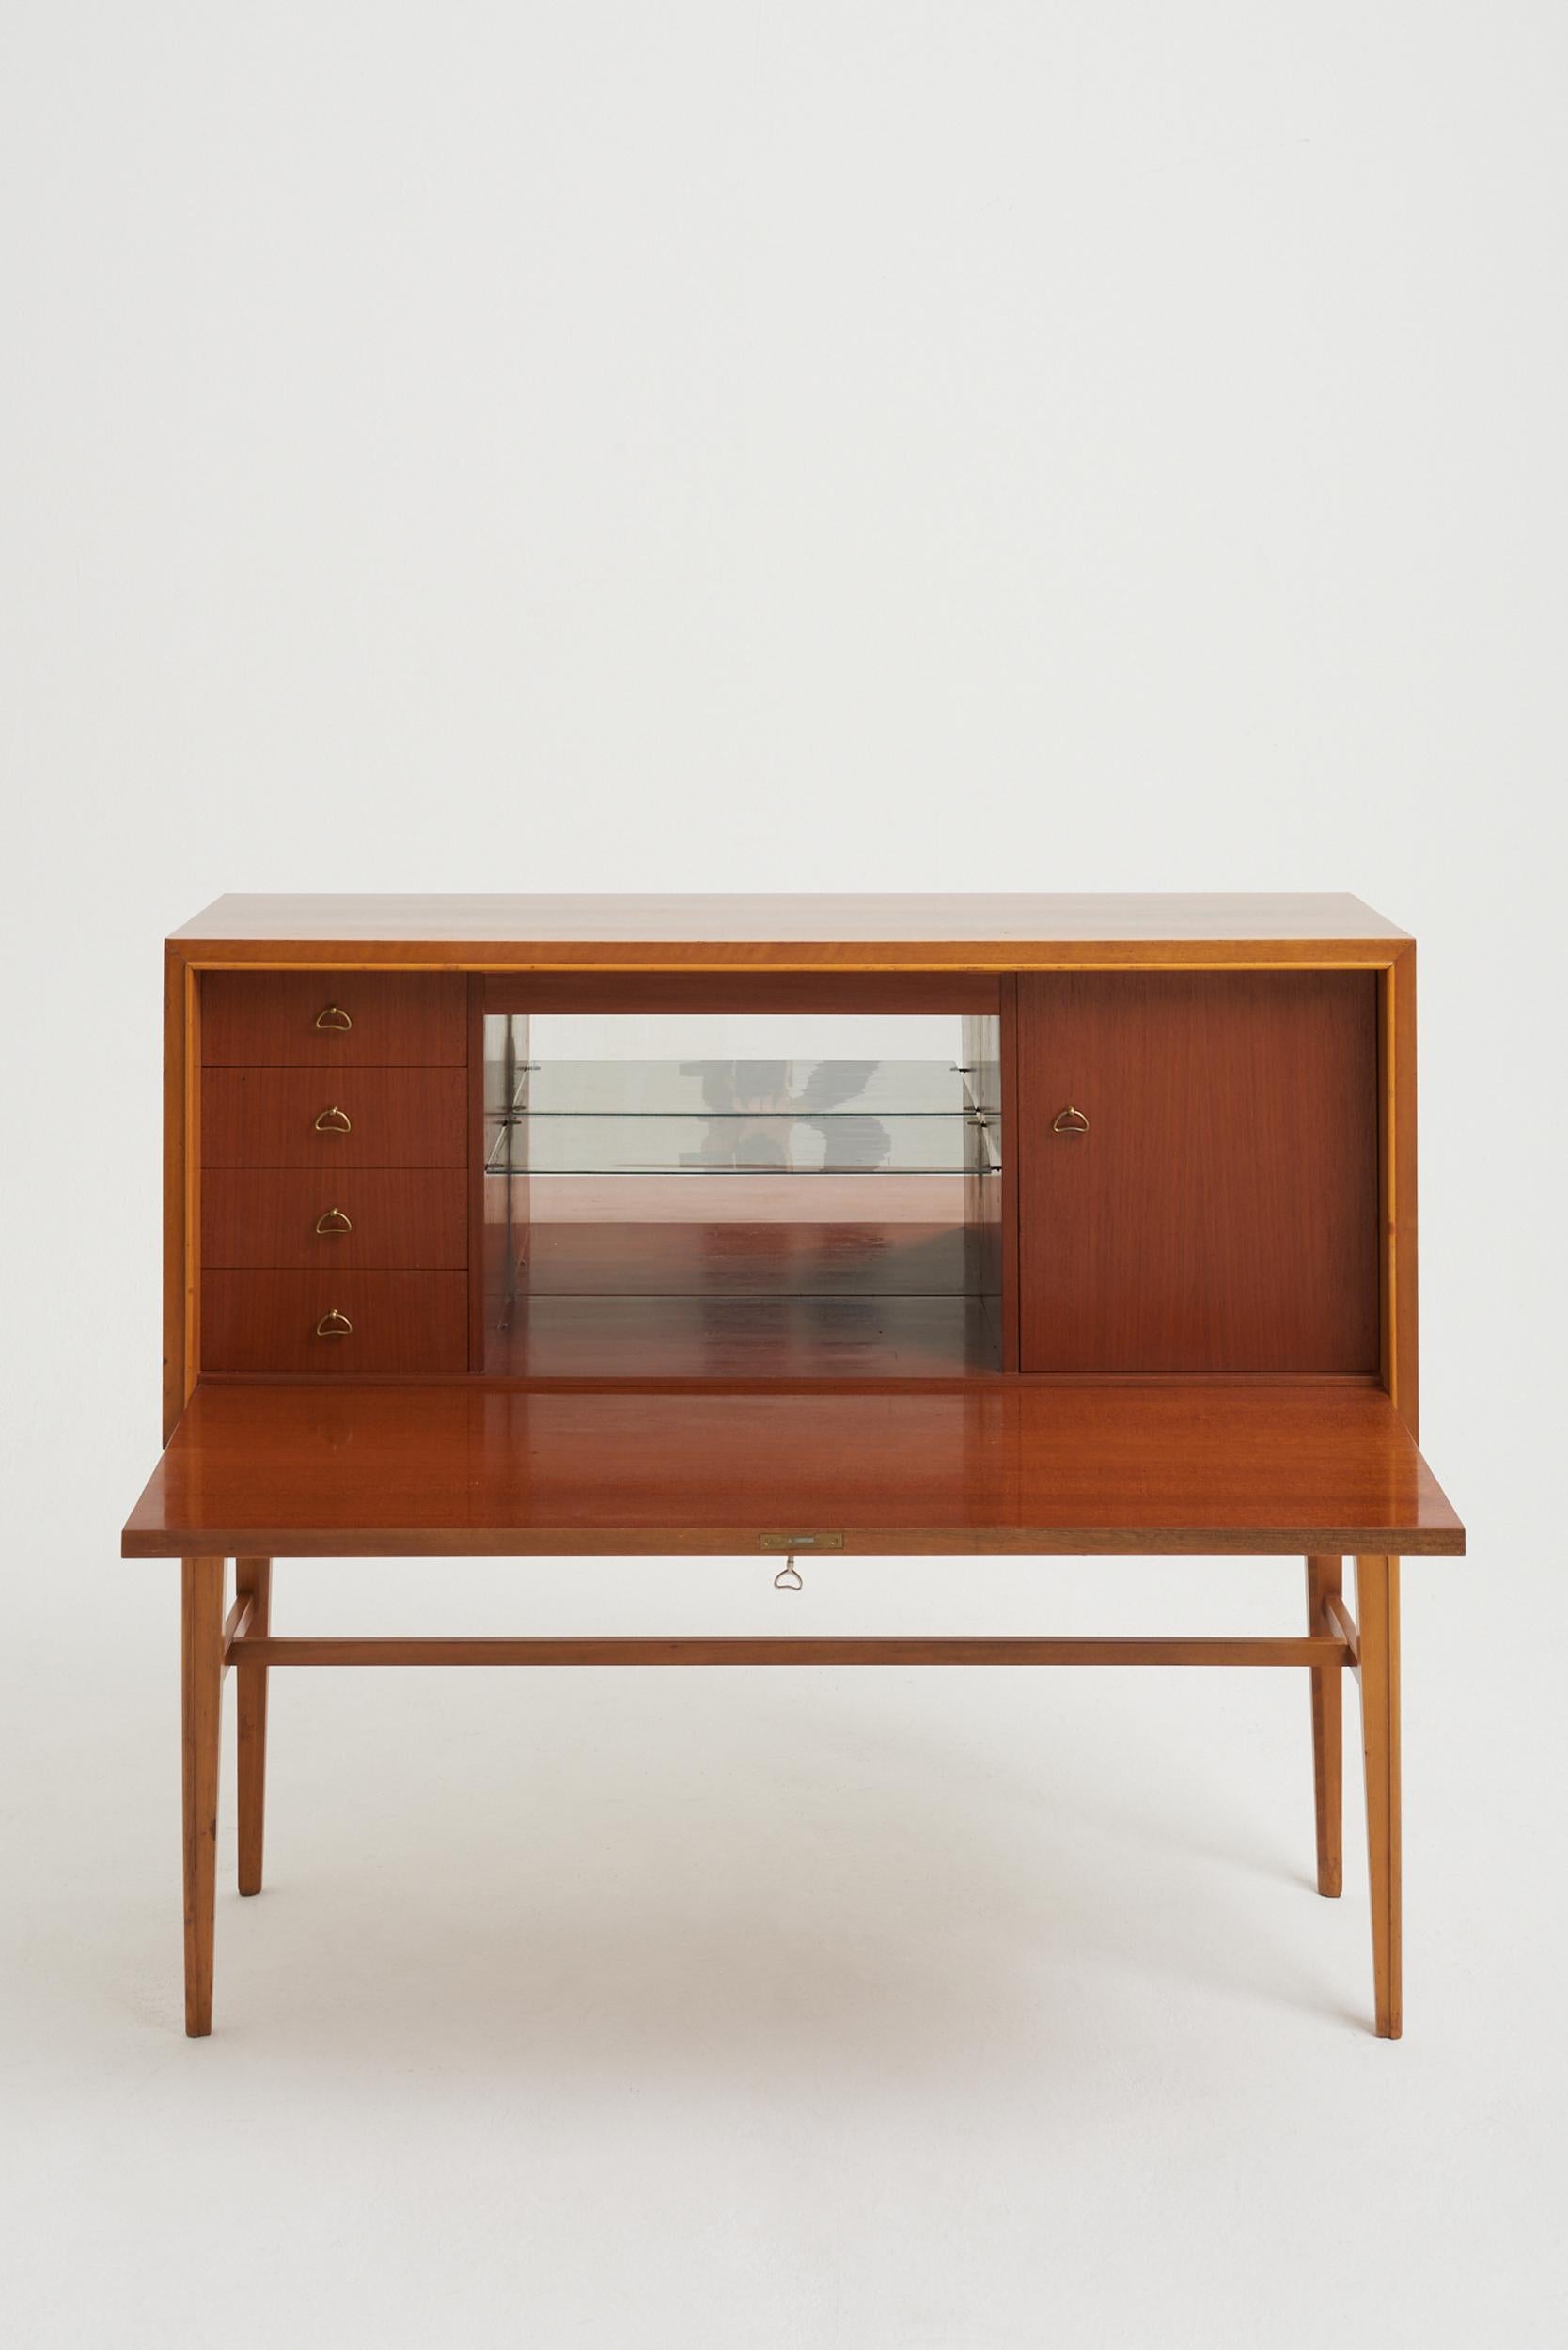 20th Century Midcentury Drinks Cabinet by Carl-Axel Acking